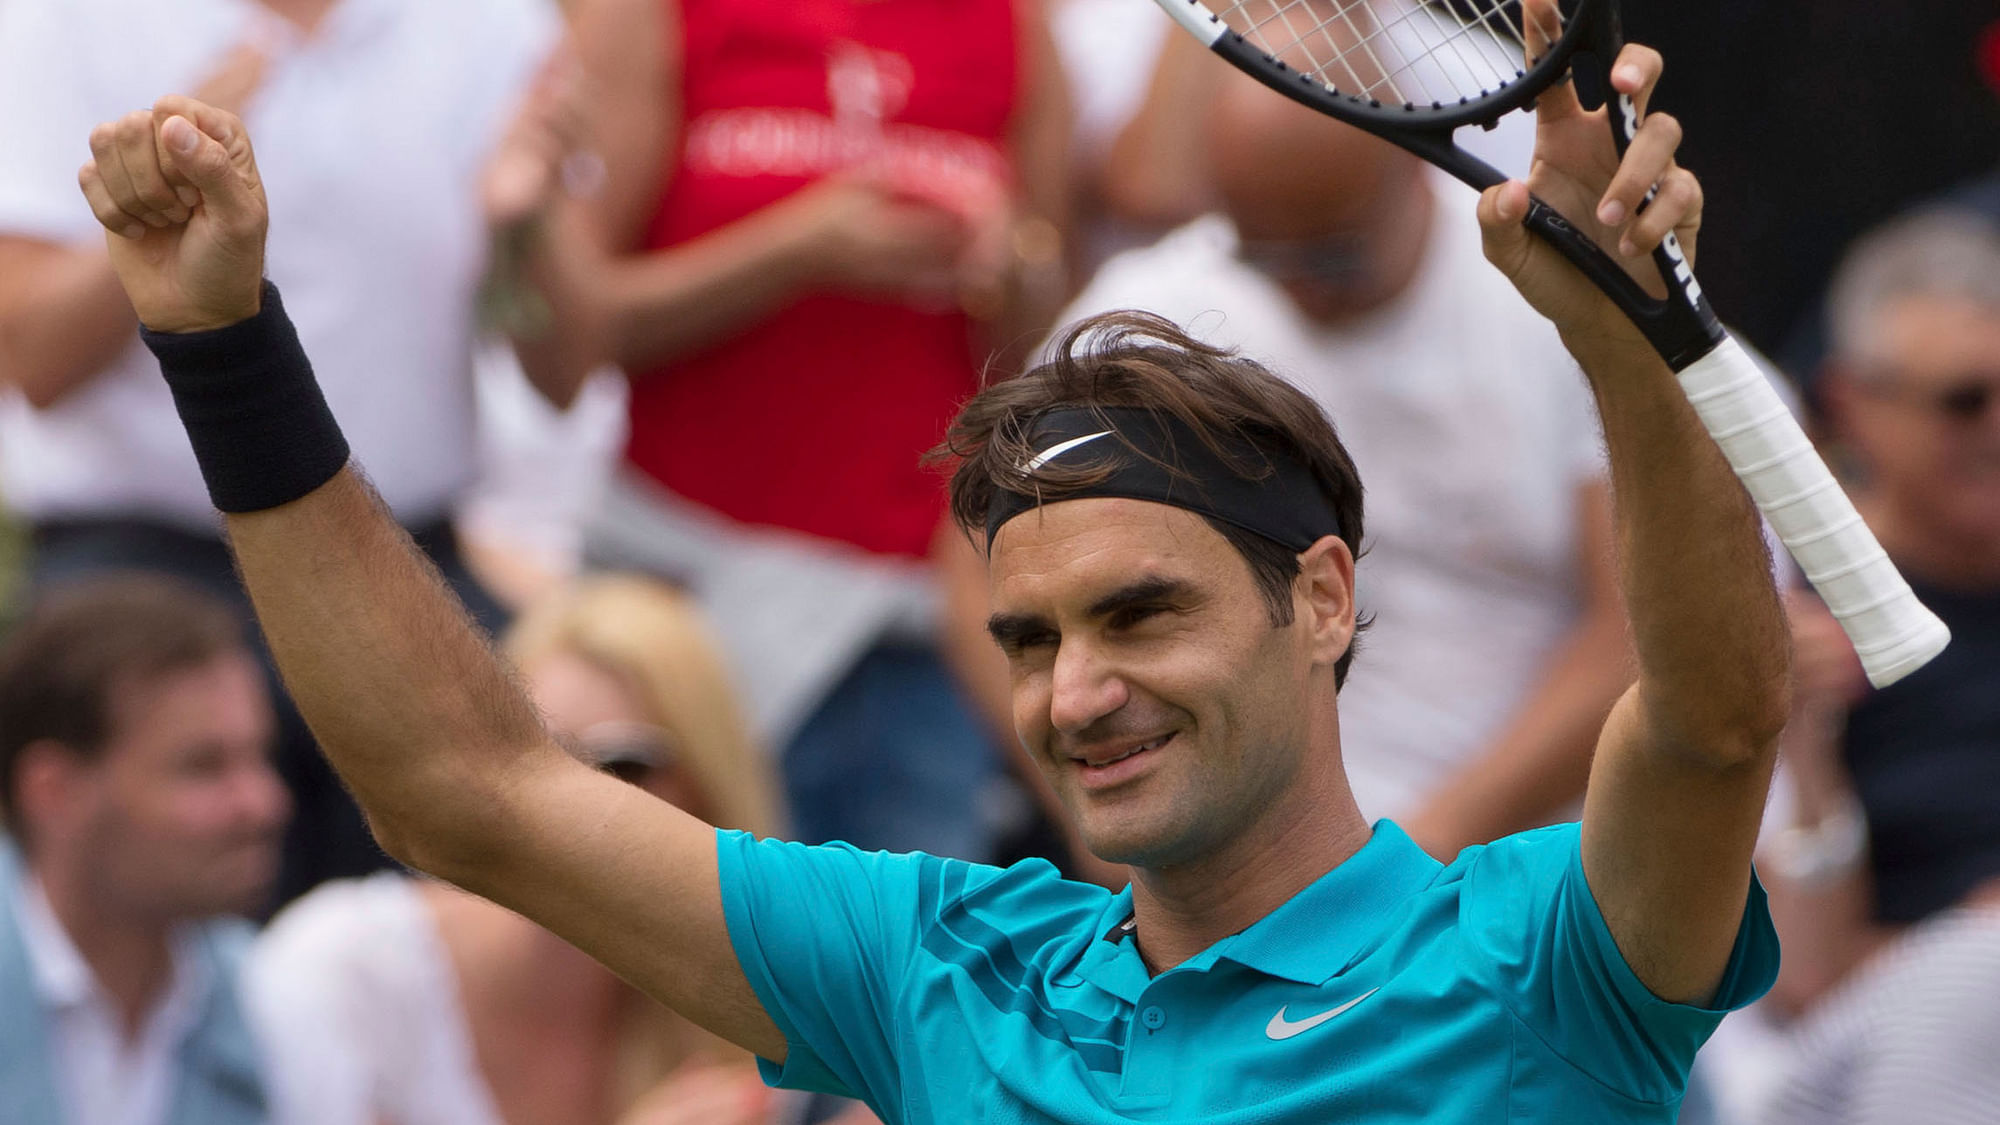 Roger Federer celebrates after he beats Milos Raonic in the final tennis match of the ATP Mercedes Cup in Stuttgart.